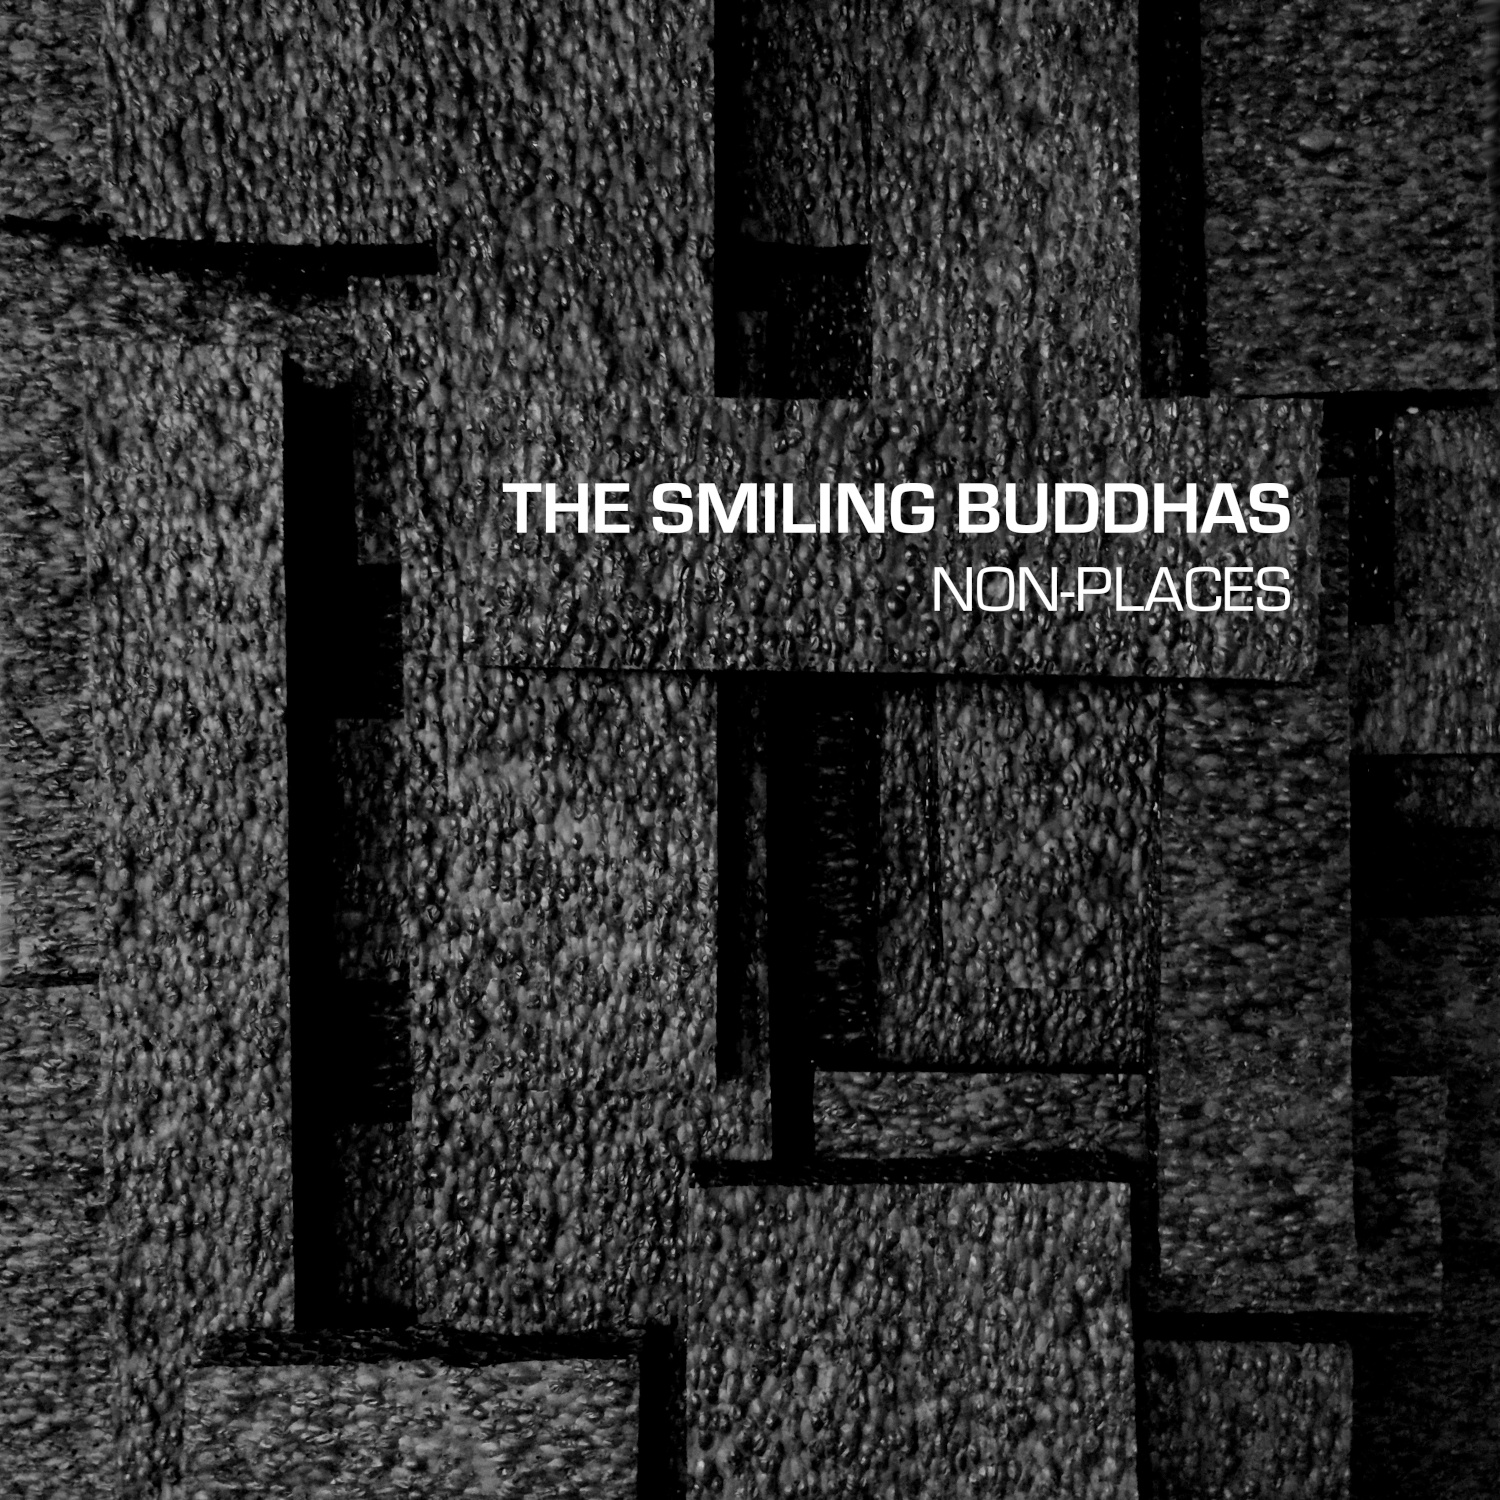 The Smiling Buddhas "Non-Places" CDR/Digital/K7